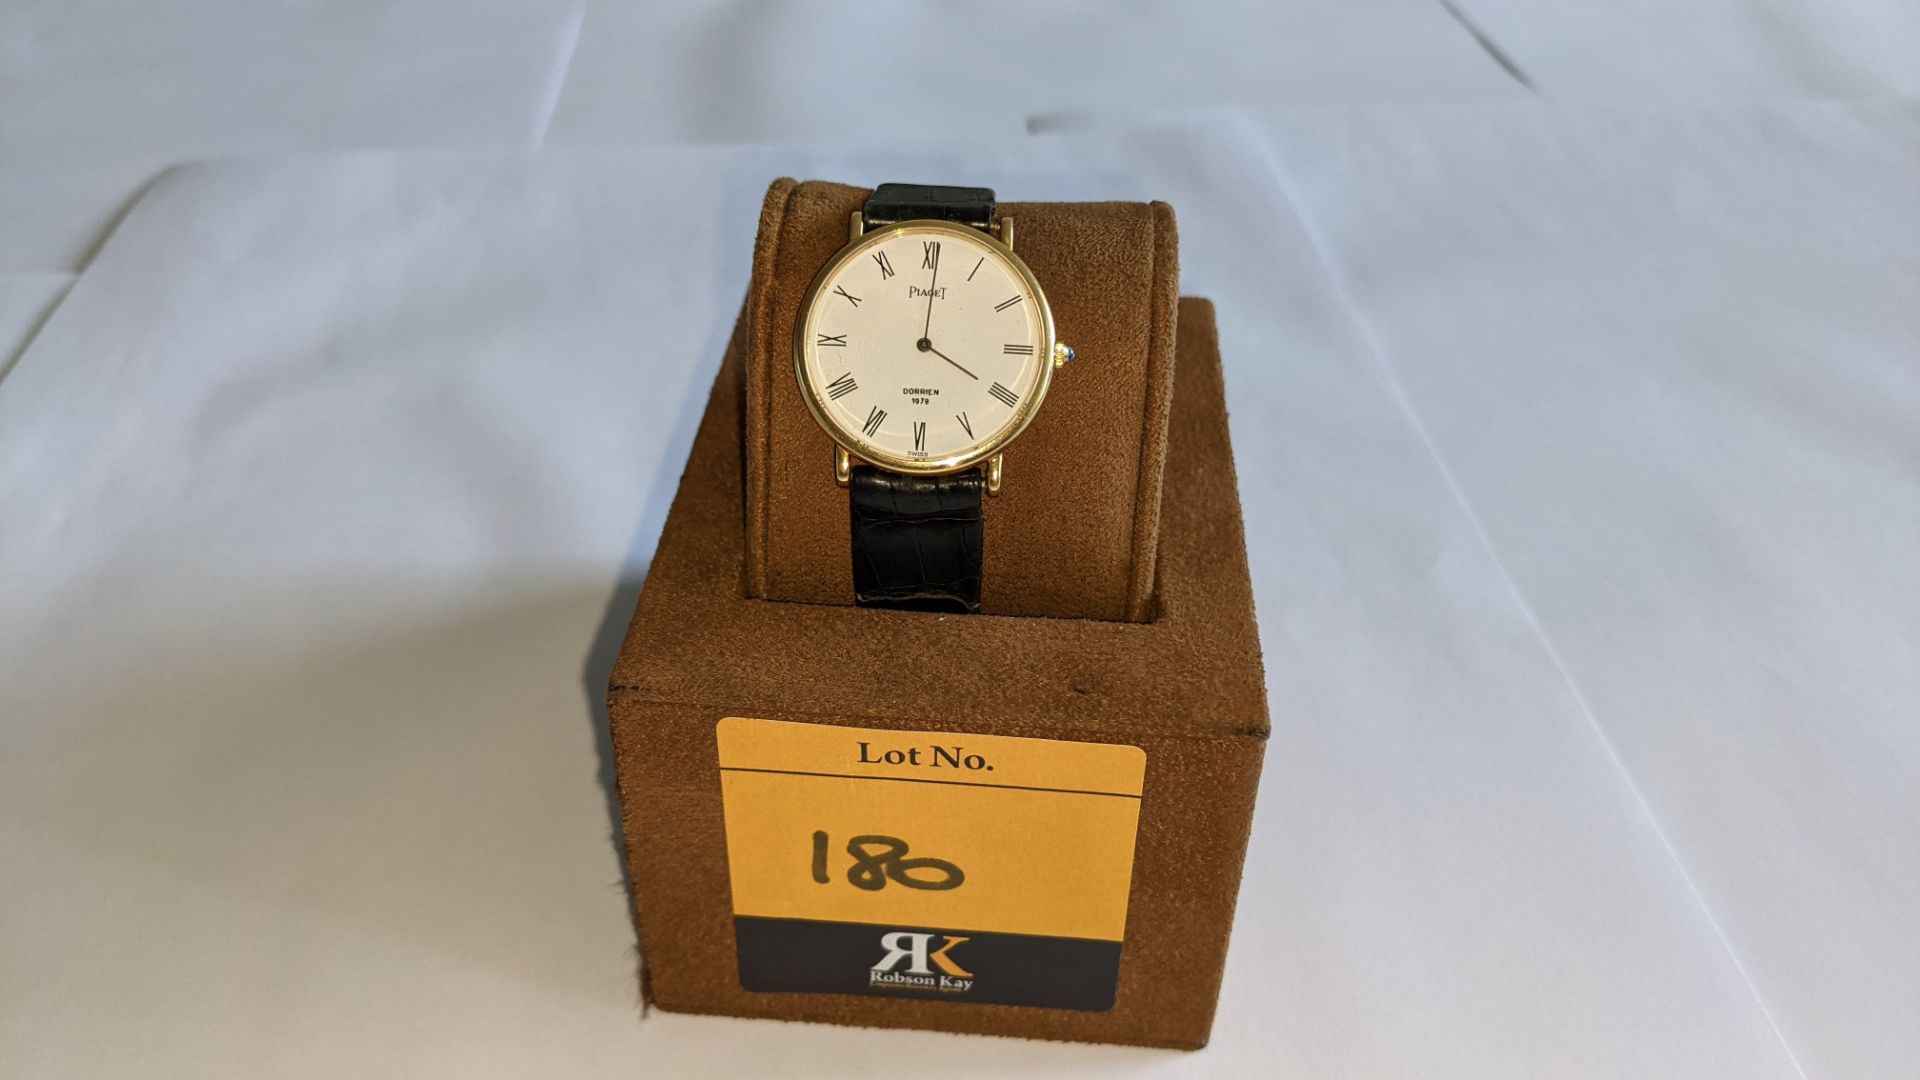 Piaget vintage yellow gold watch on leather strap. Priced (used) at £1,595. It appears to be in yell - Image 11 of 14